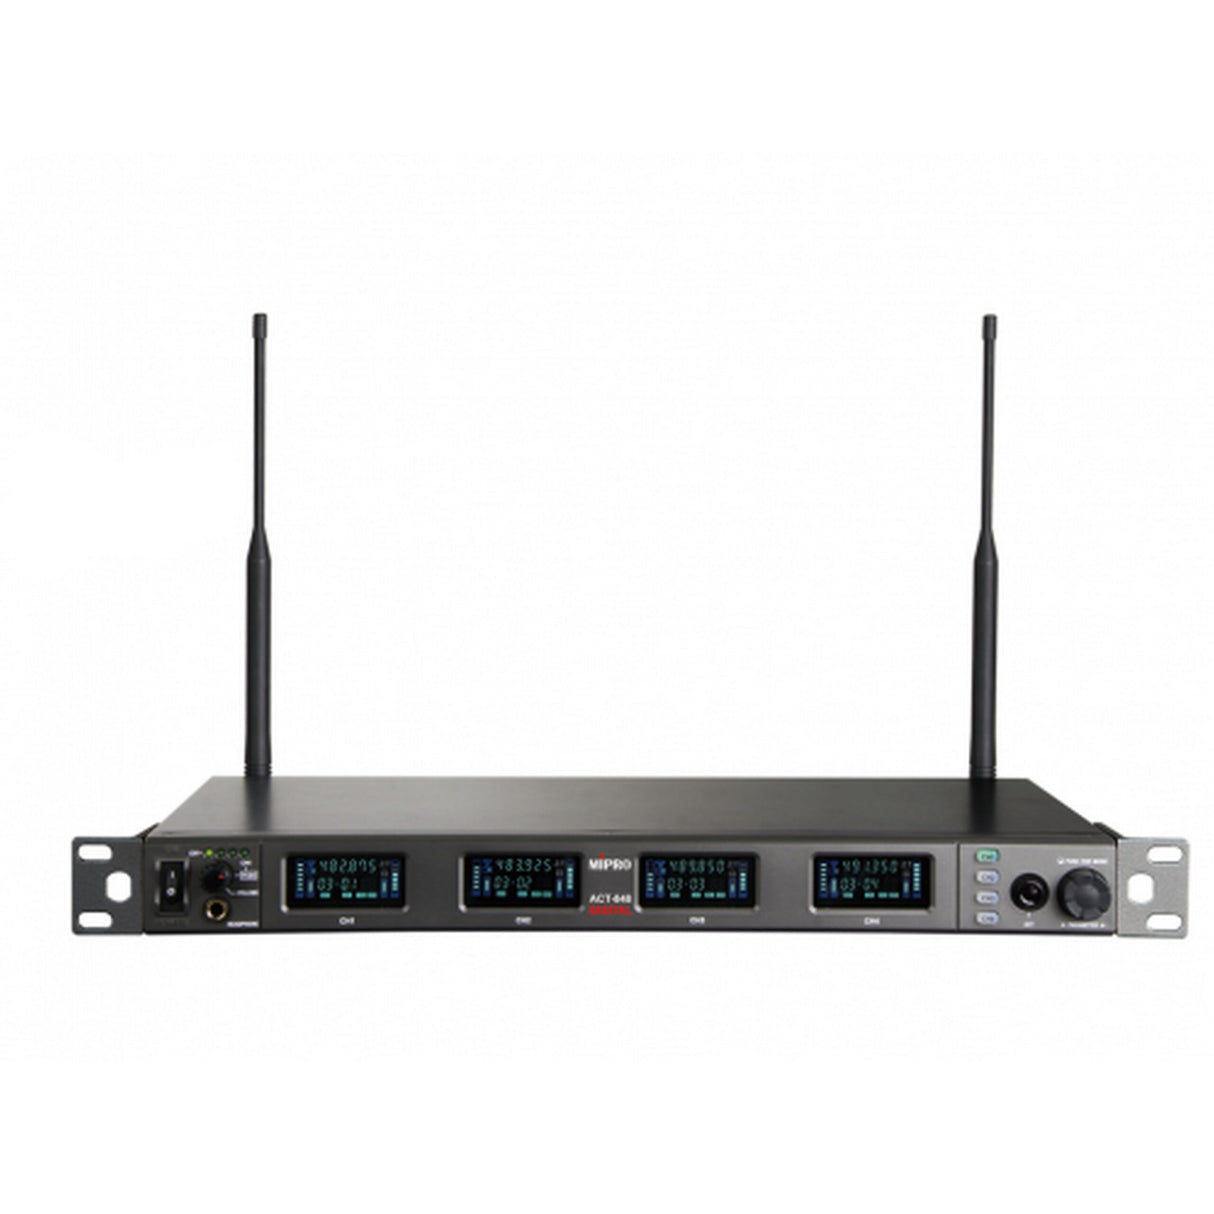 MiPro ACT-848 1U Quad-Channel UHF Wideband Digital Receiver with Dante, 5E